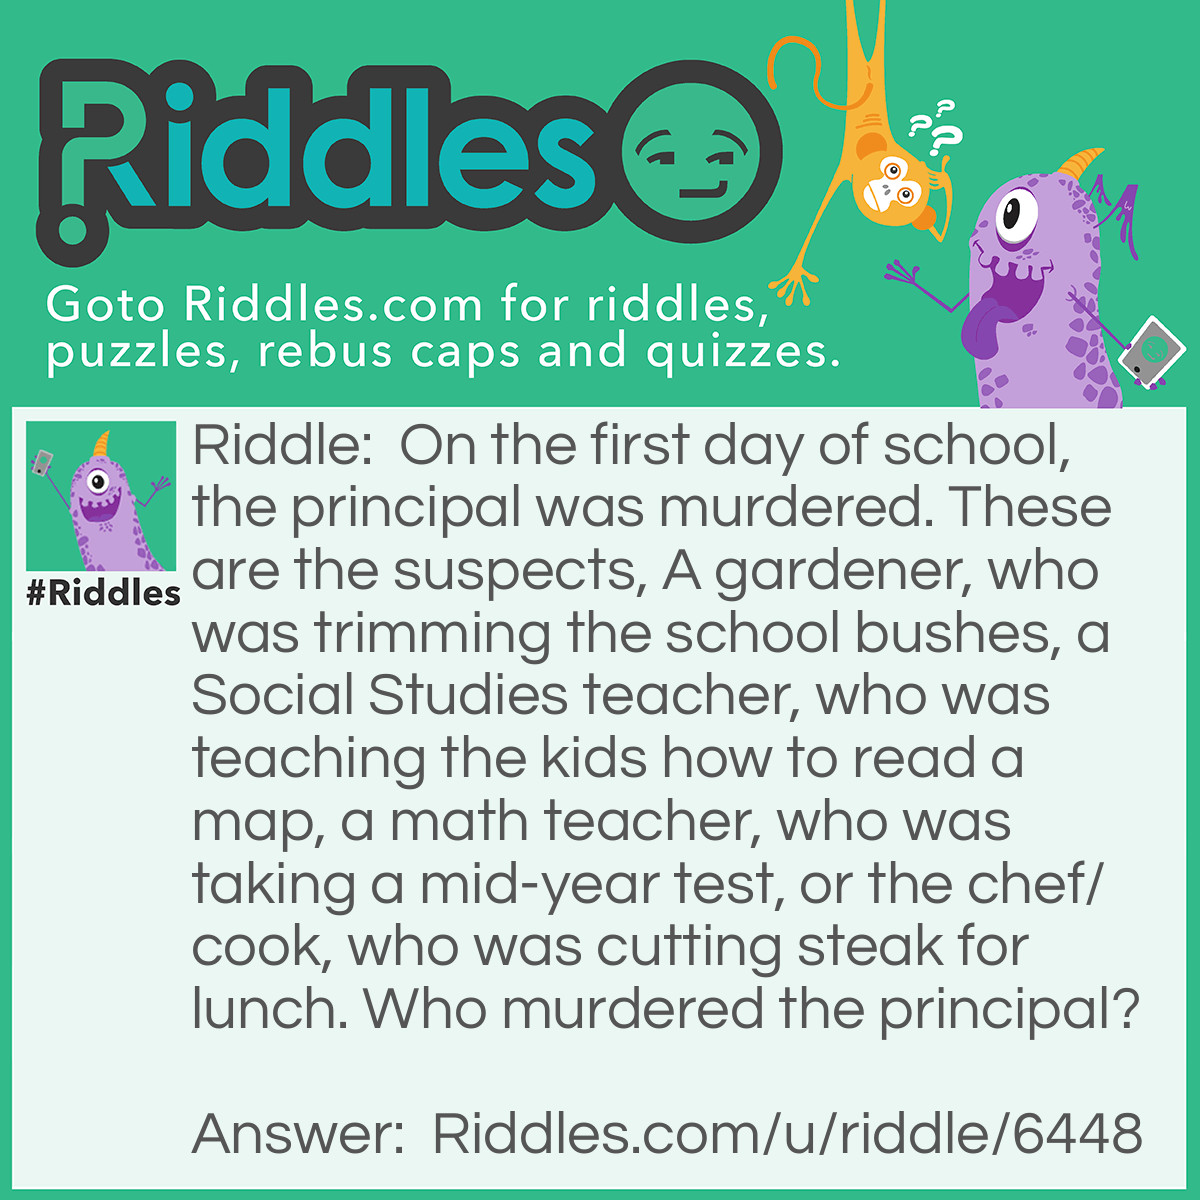 Riddle: On the first day of school, the principal was murdered. These are the suspects, A gardener, who was trimming the school bushes, a Social Studies teacher, who was teaching the kids how to read a map, a math teacher, who was taking a mid-year test, or the chef/cook, who was cutting steak for lunch. Who murdered the principal? Answer: The math teacher (He was 'Taking' a mid year test, on the first day of school!)